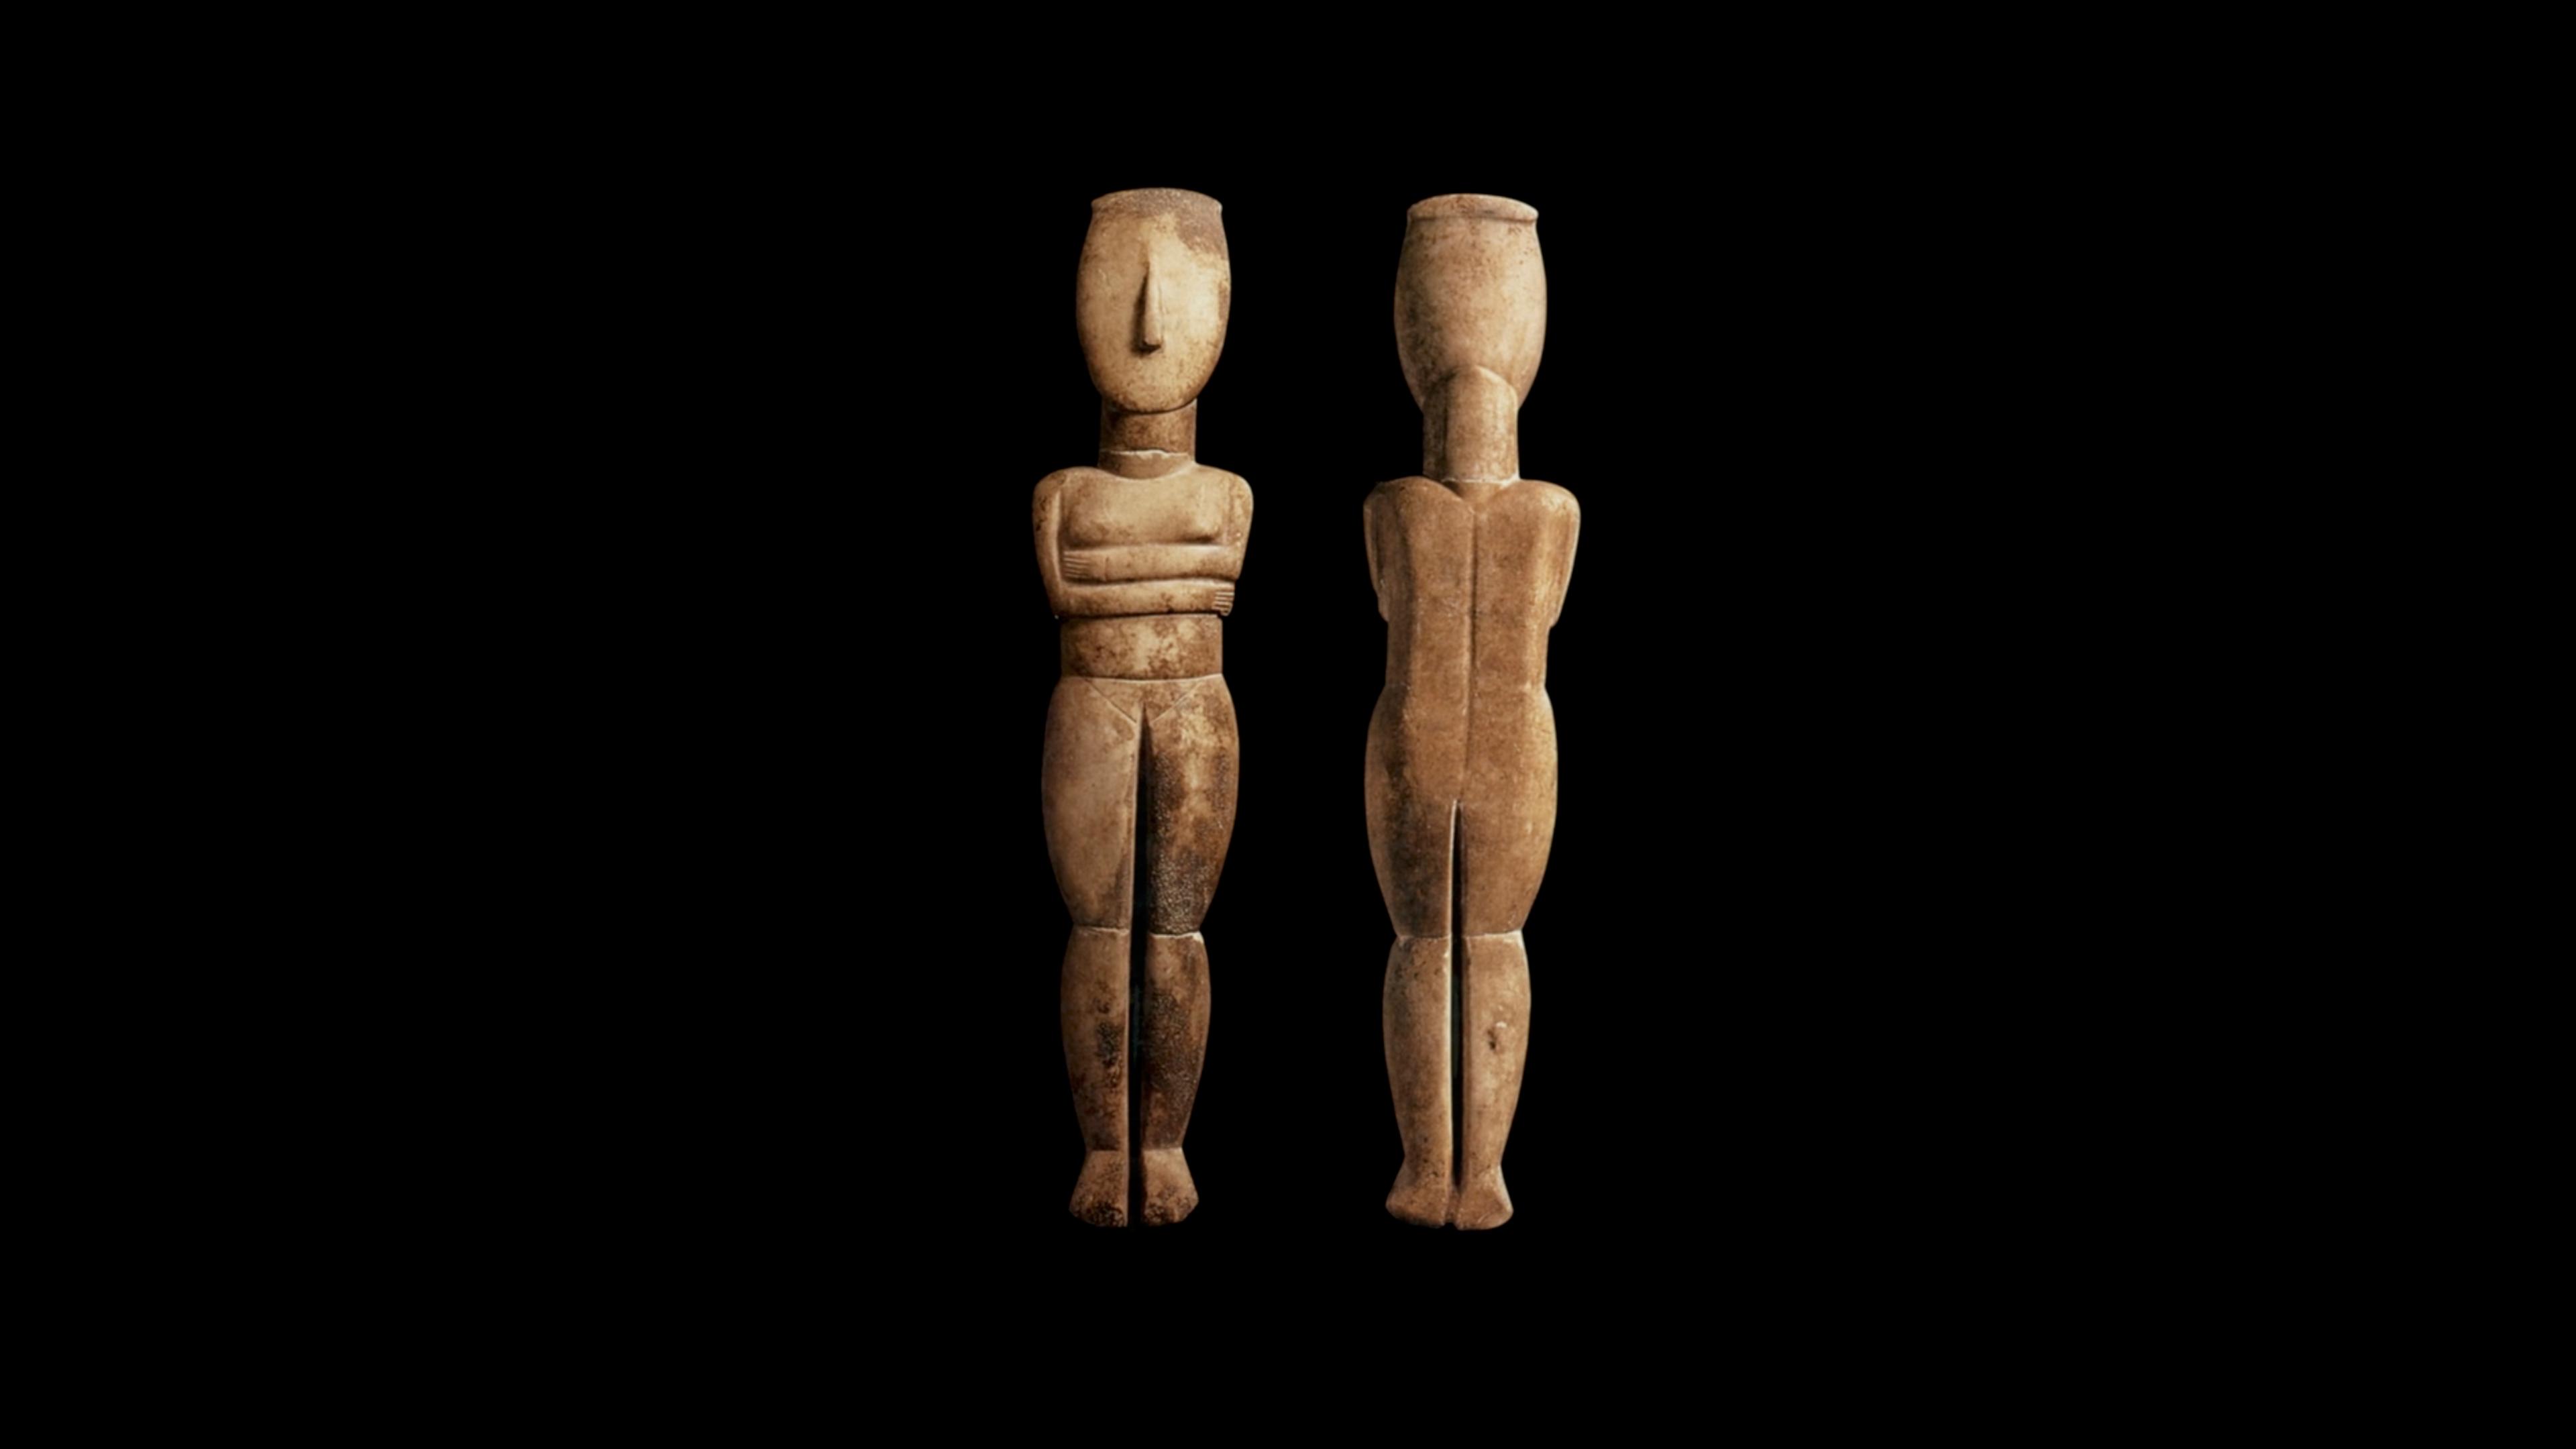 Two cycladic figures—one facing the viewer and one with its back to the viewer—against a black background